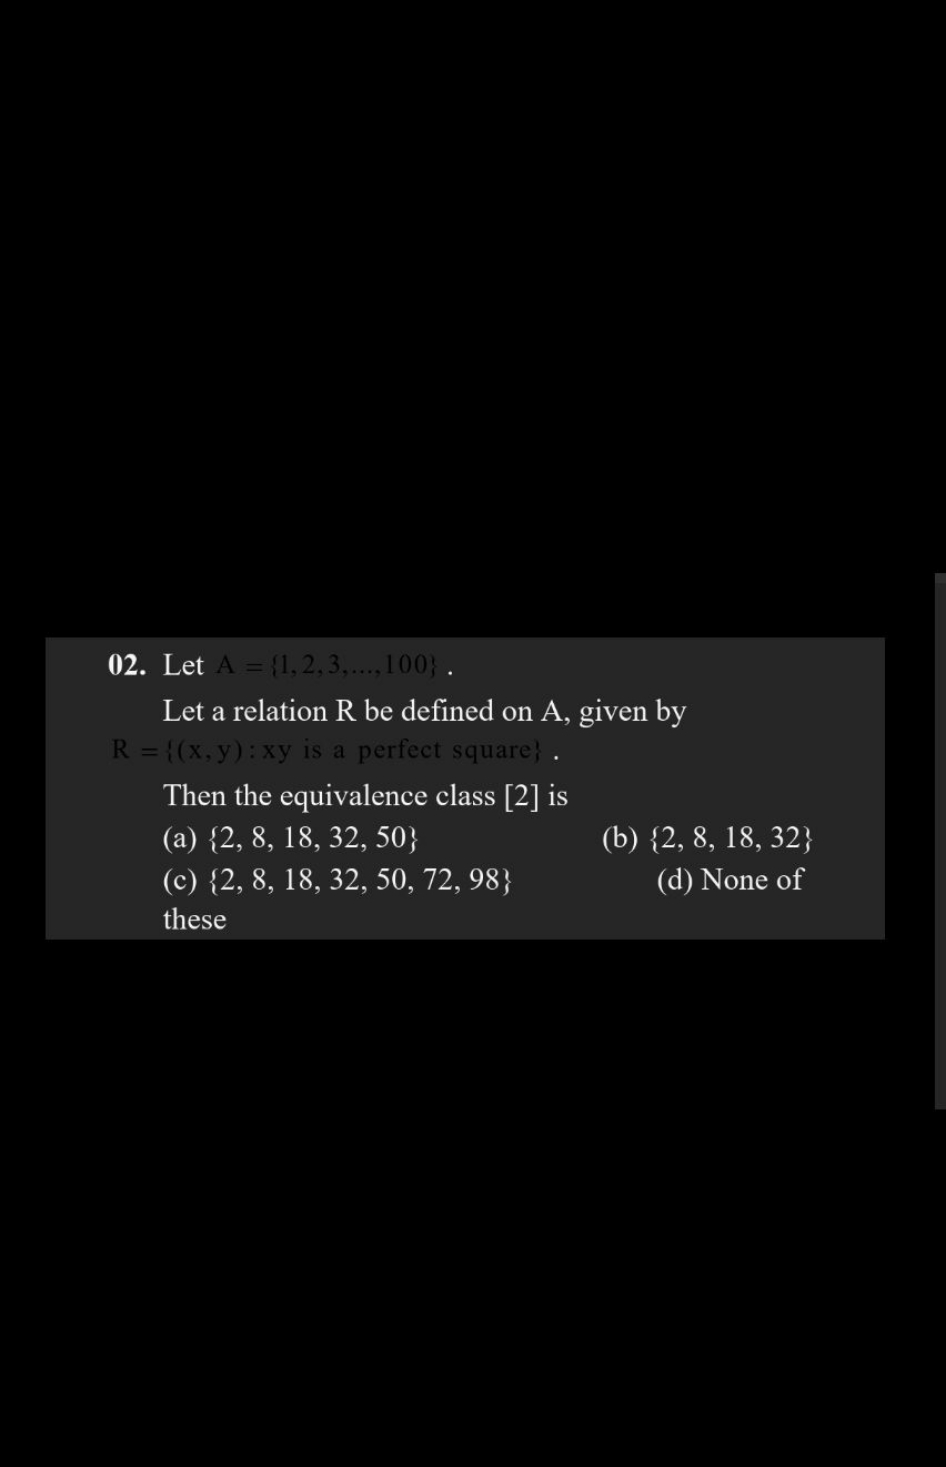 Let Let a relation R be defined on A, given by R={(x,y):xy is a perfec